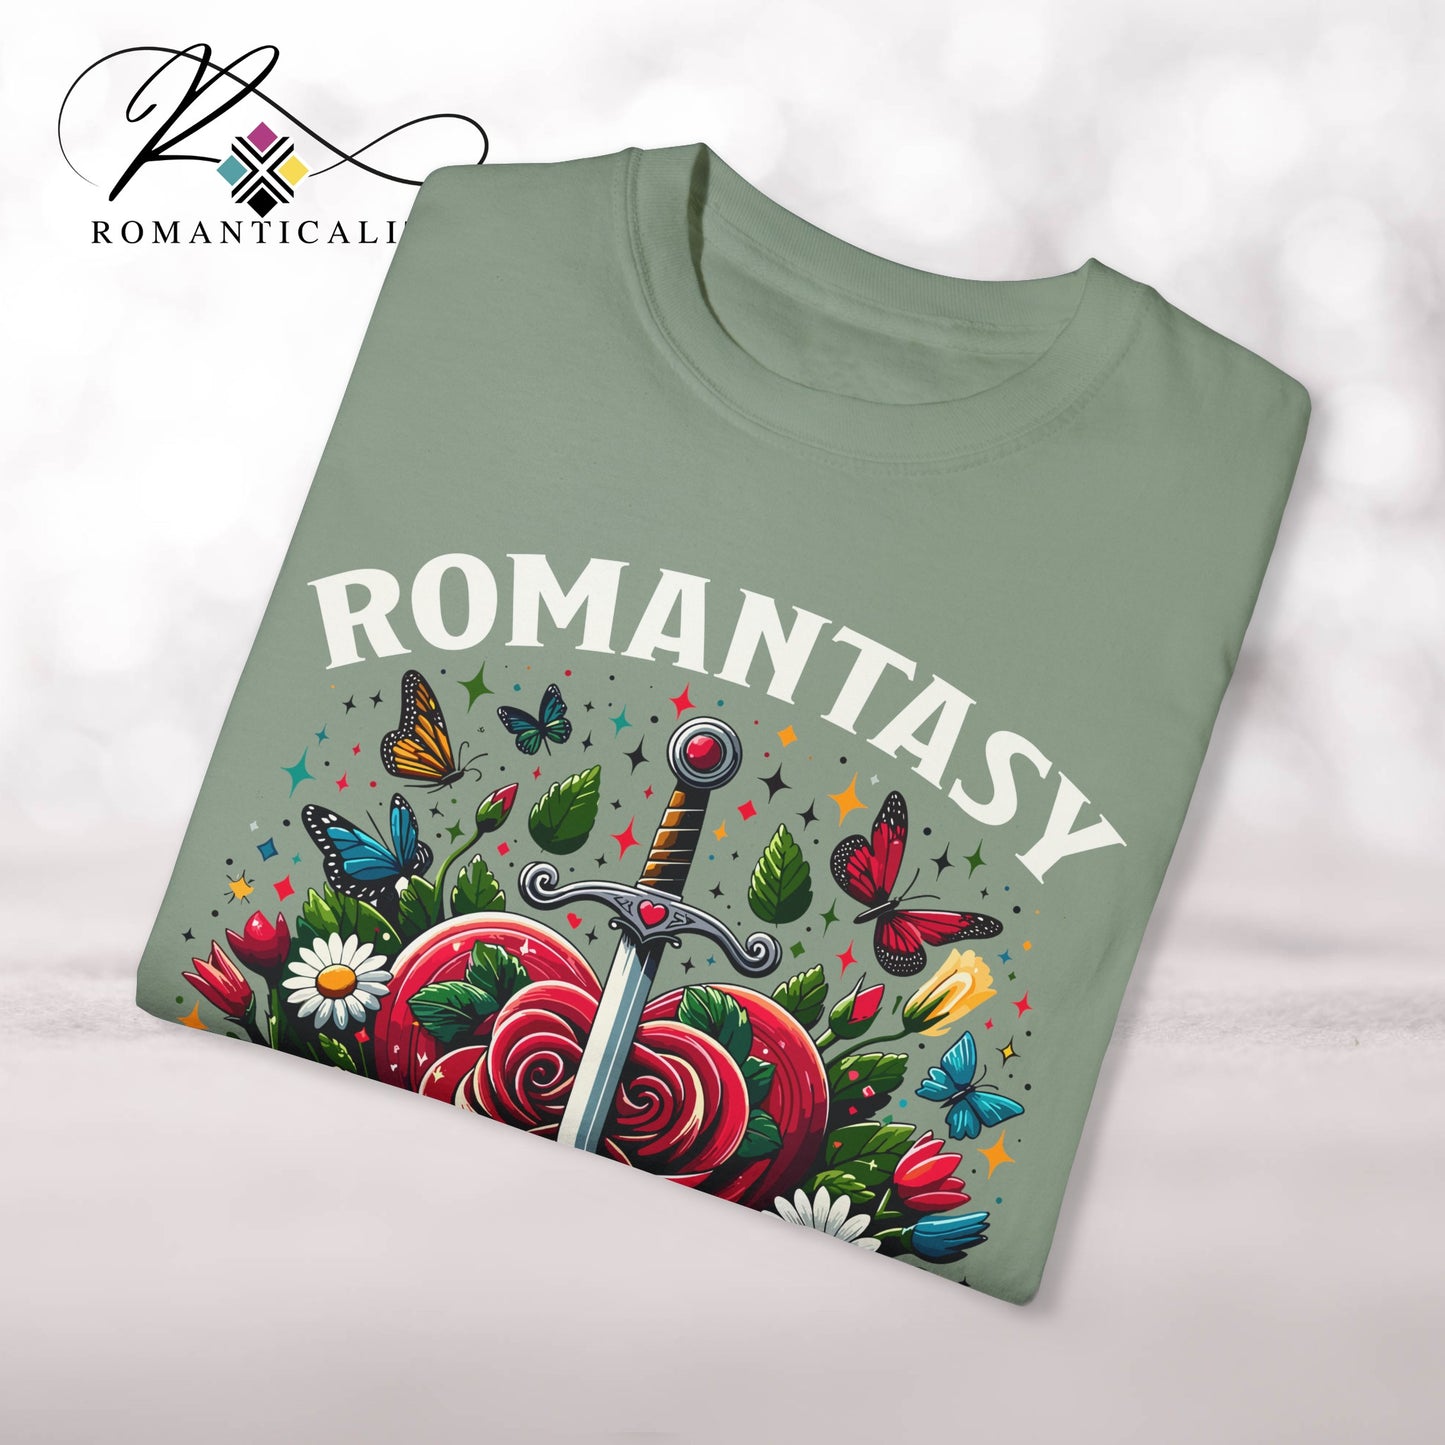 Romantasy Book Club Tee-Array of Colors-Comfortable Book Lover T-Shirt-Gift for Readers/Writers